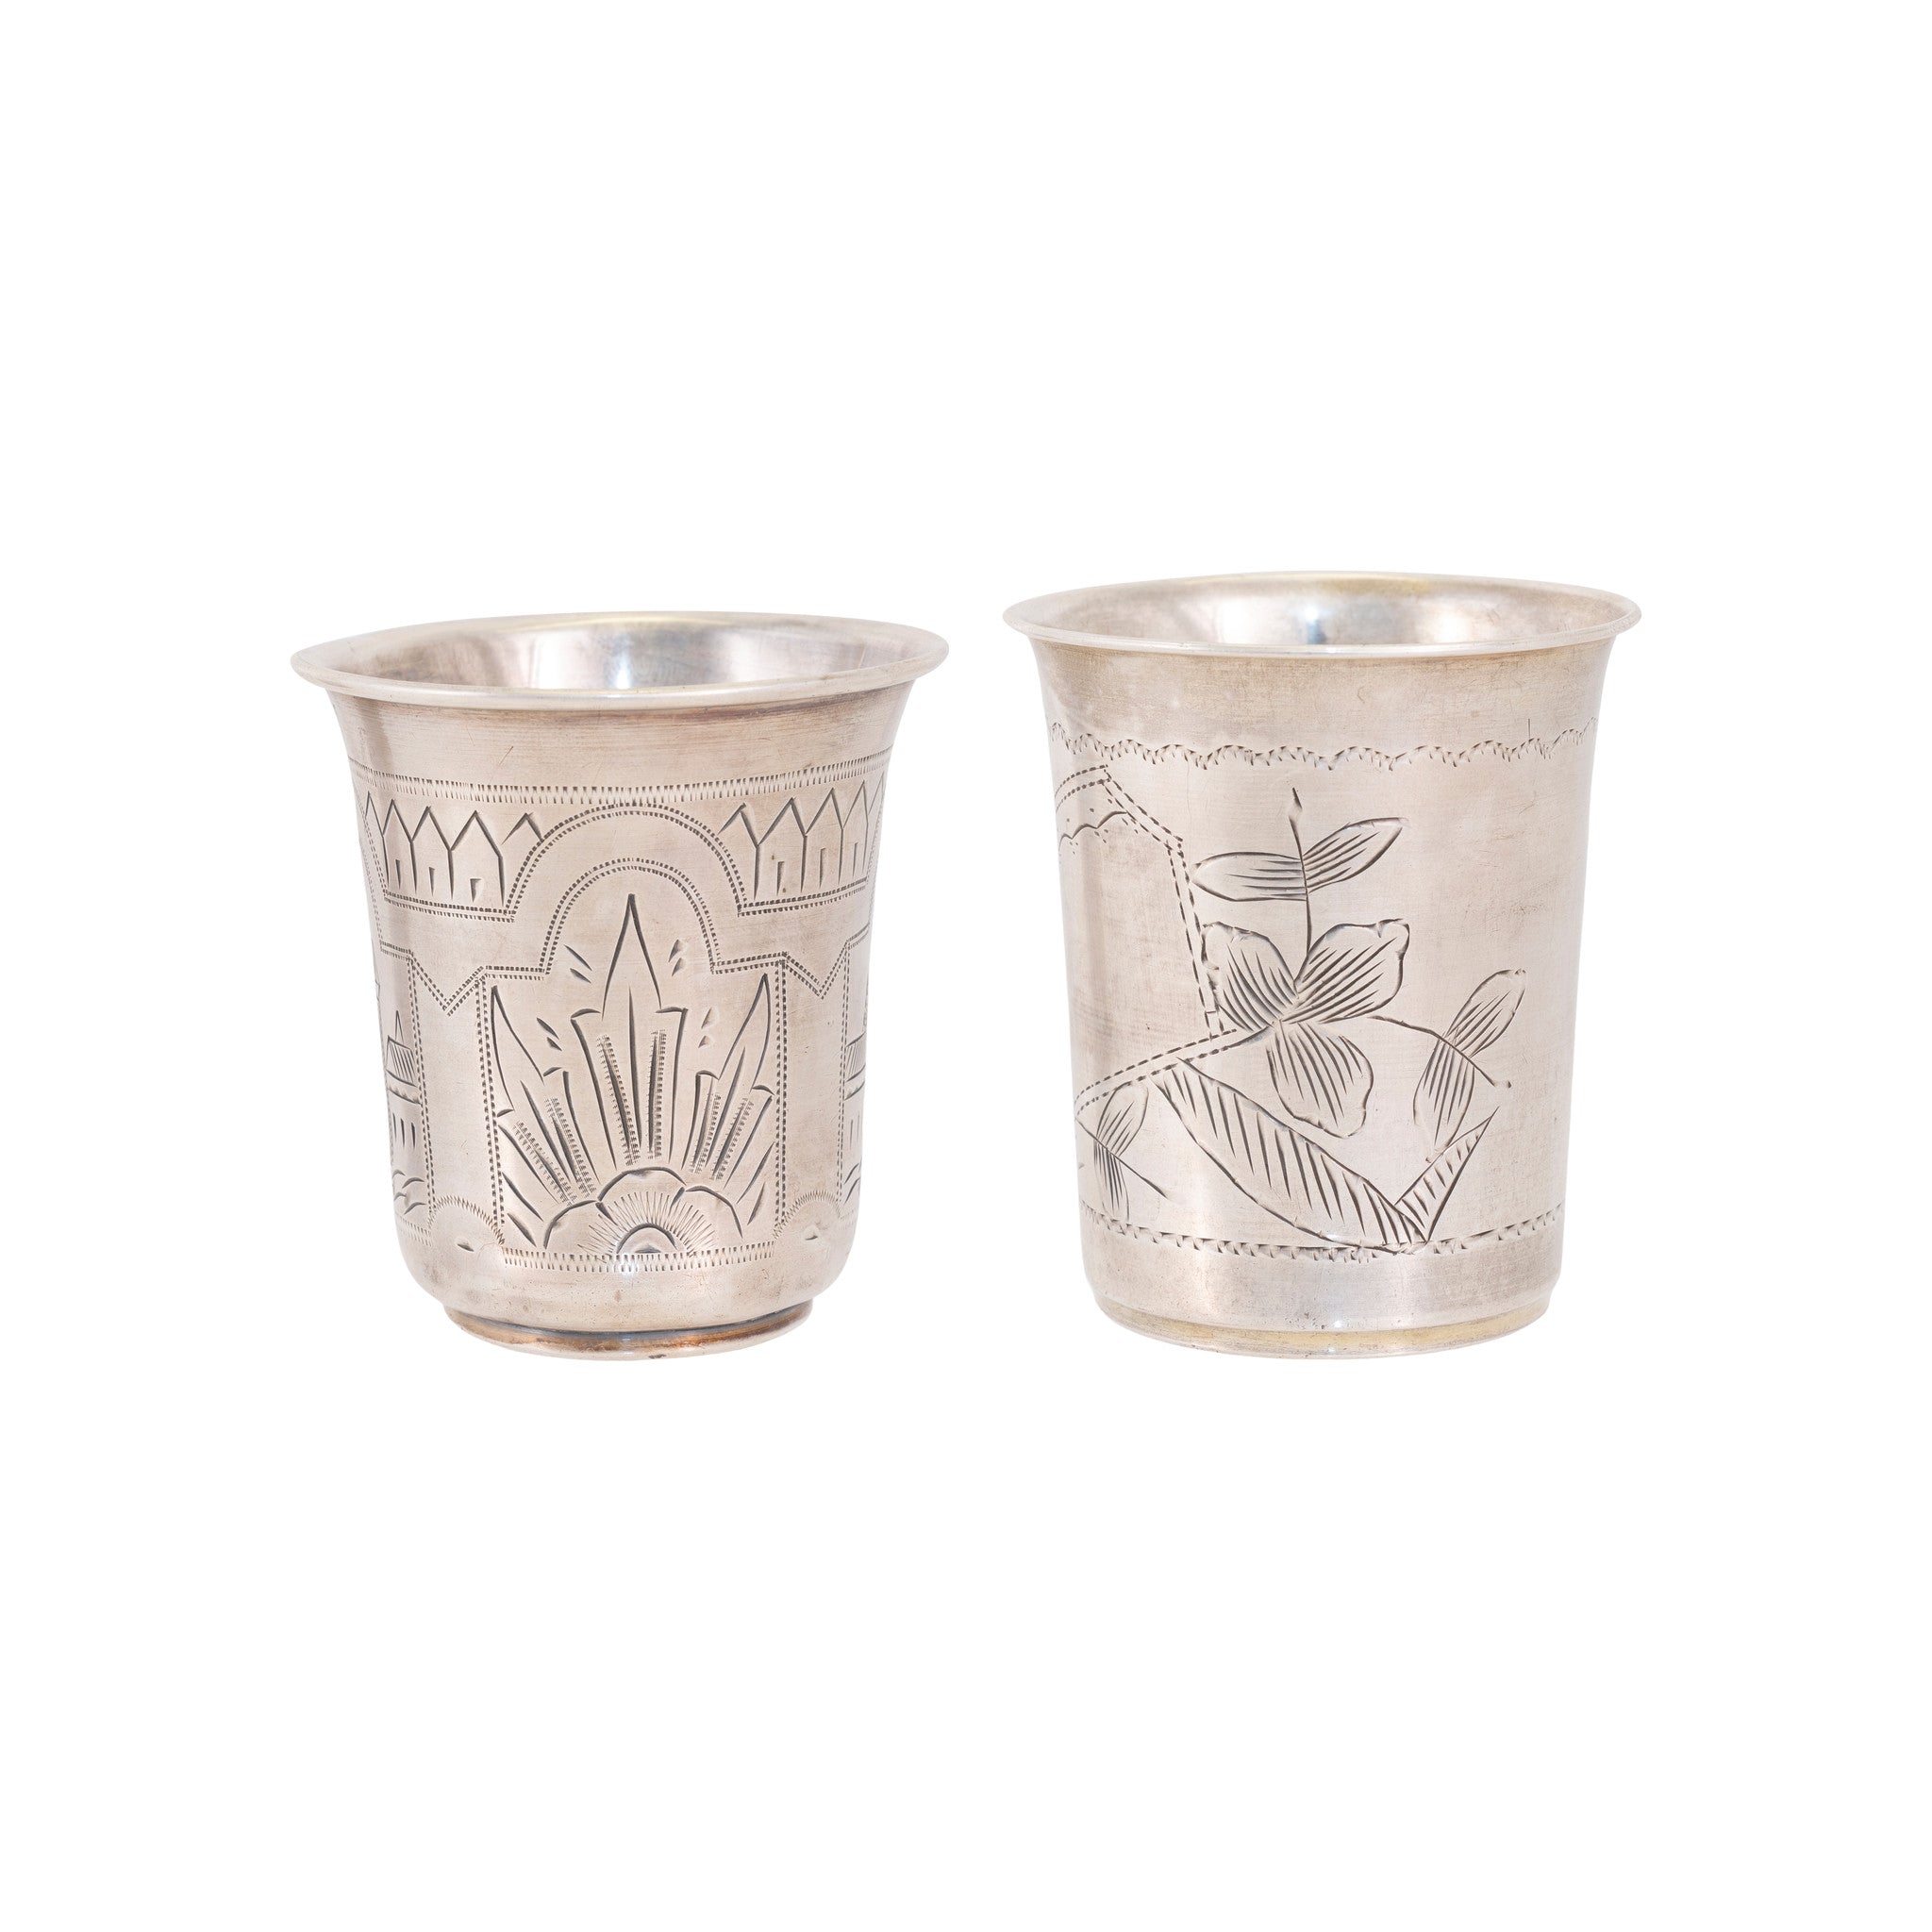 Sterling Tumblers